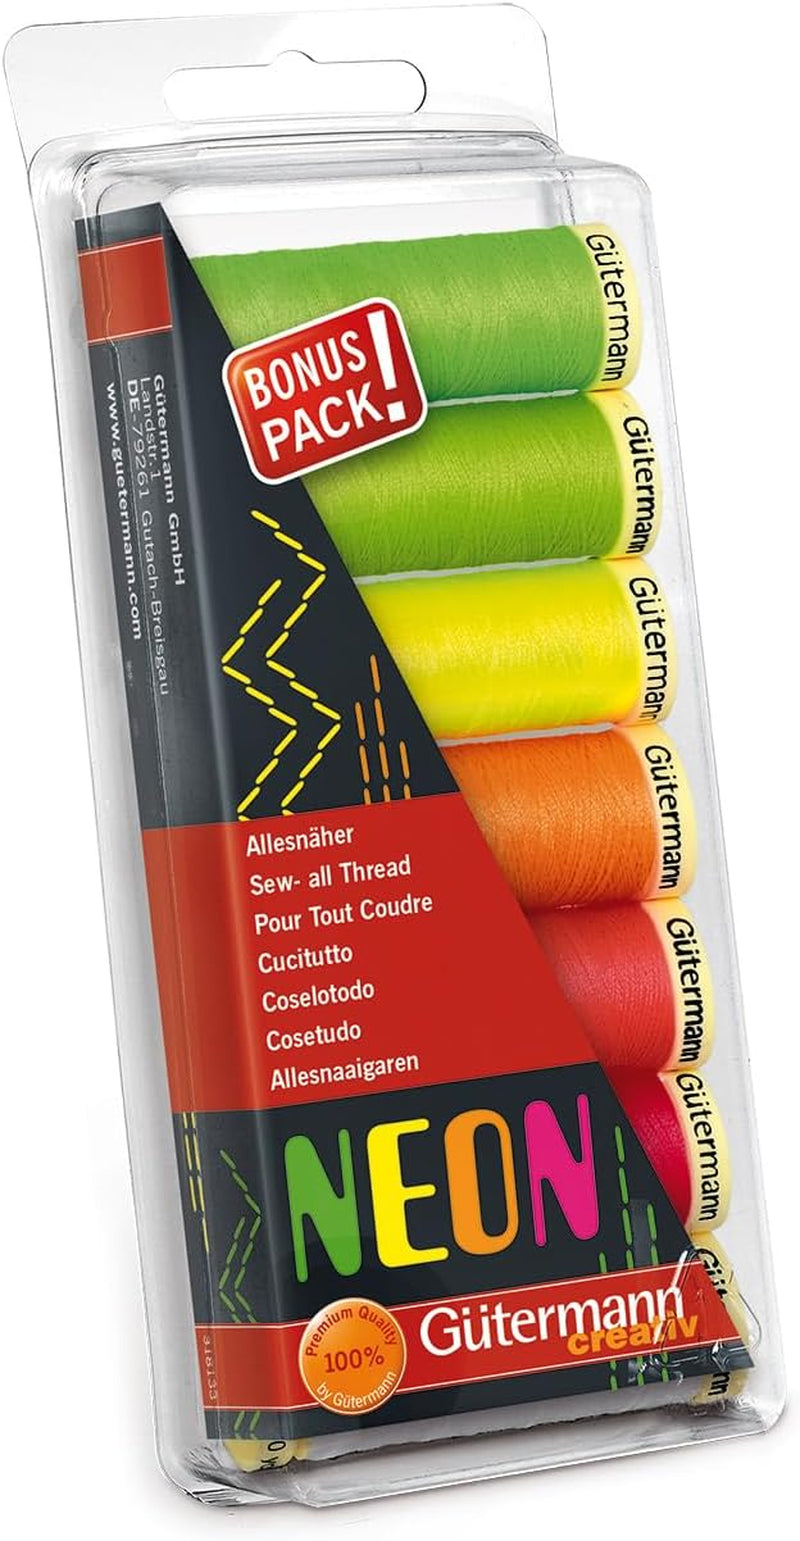 Thread Set: Sew-All: 100M: Pack of 20, Assorted